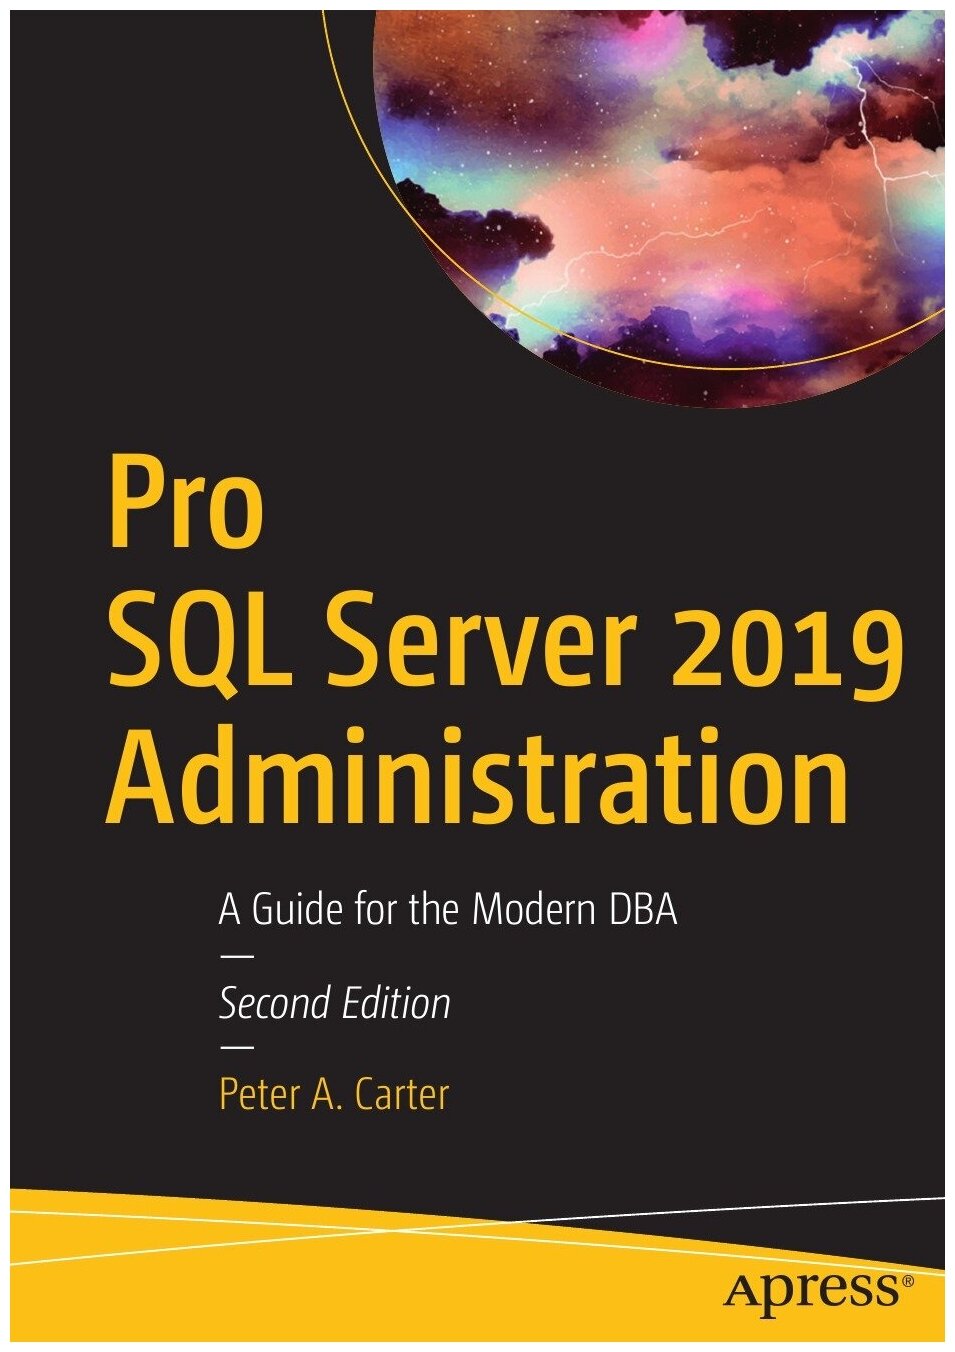 Pro SQL Server 2019 Administration. A Guide for the Modern DBA